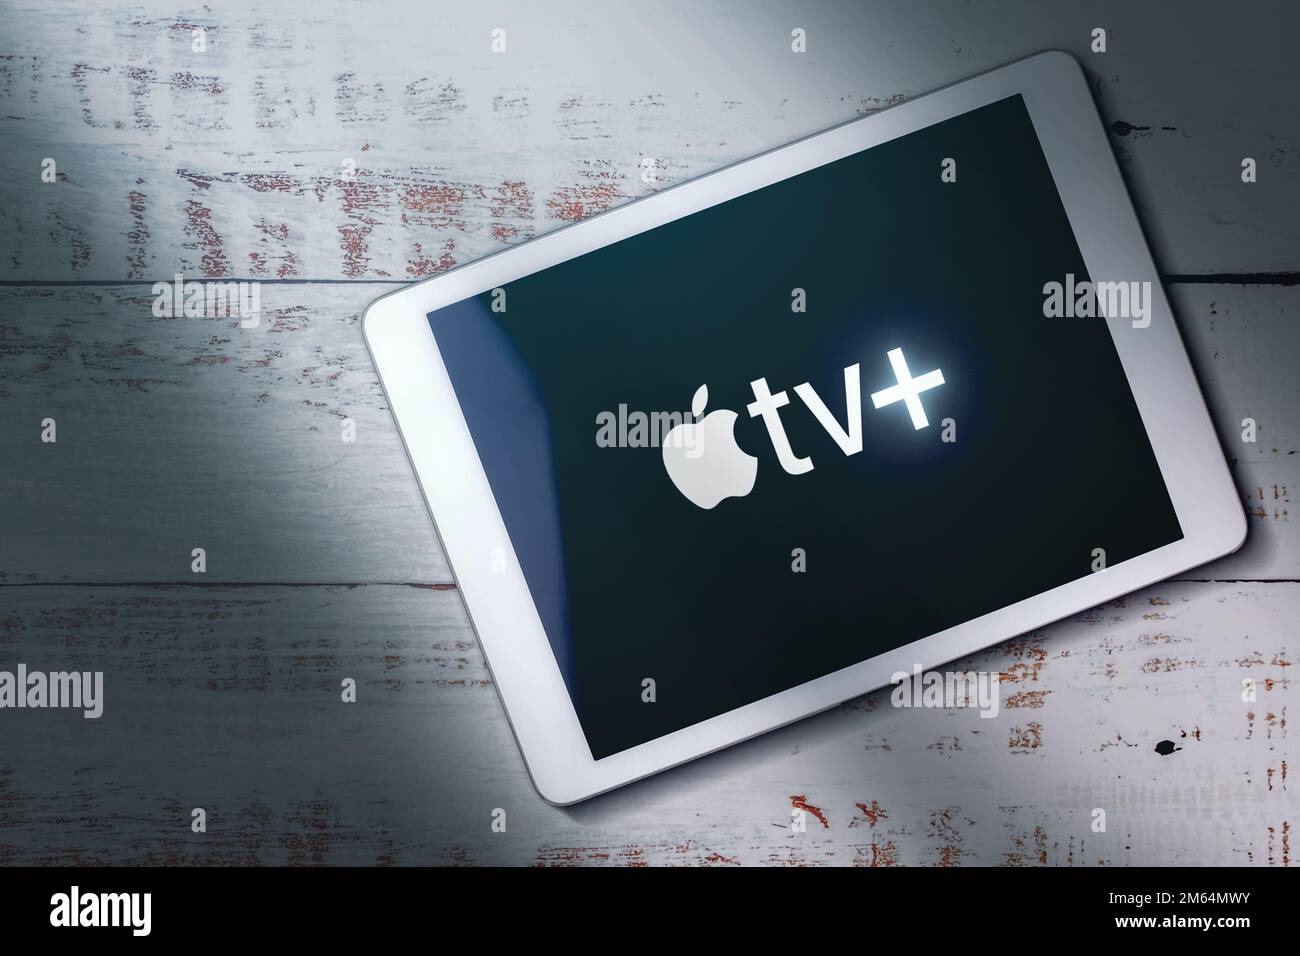 MÁLAGA - SPAIN - DECEMBER 21, 2022: Top view of digital tablet with Apple TV Plus logo on screen. Video streaming subscription service. Stock Photo